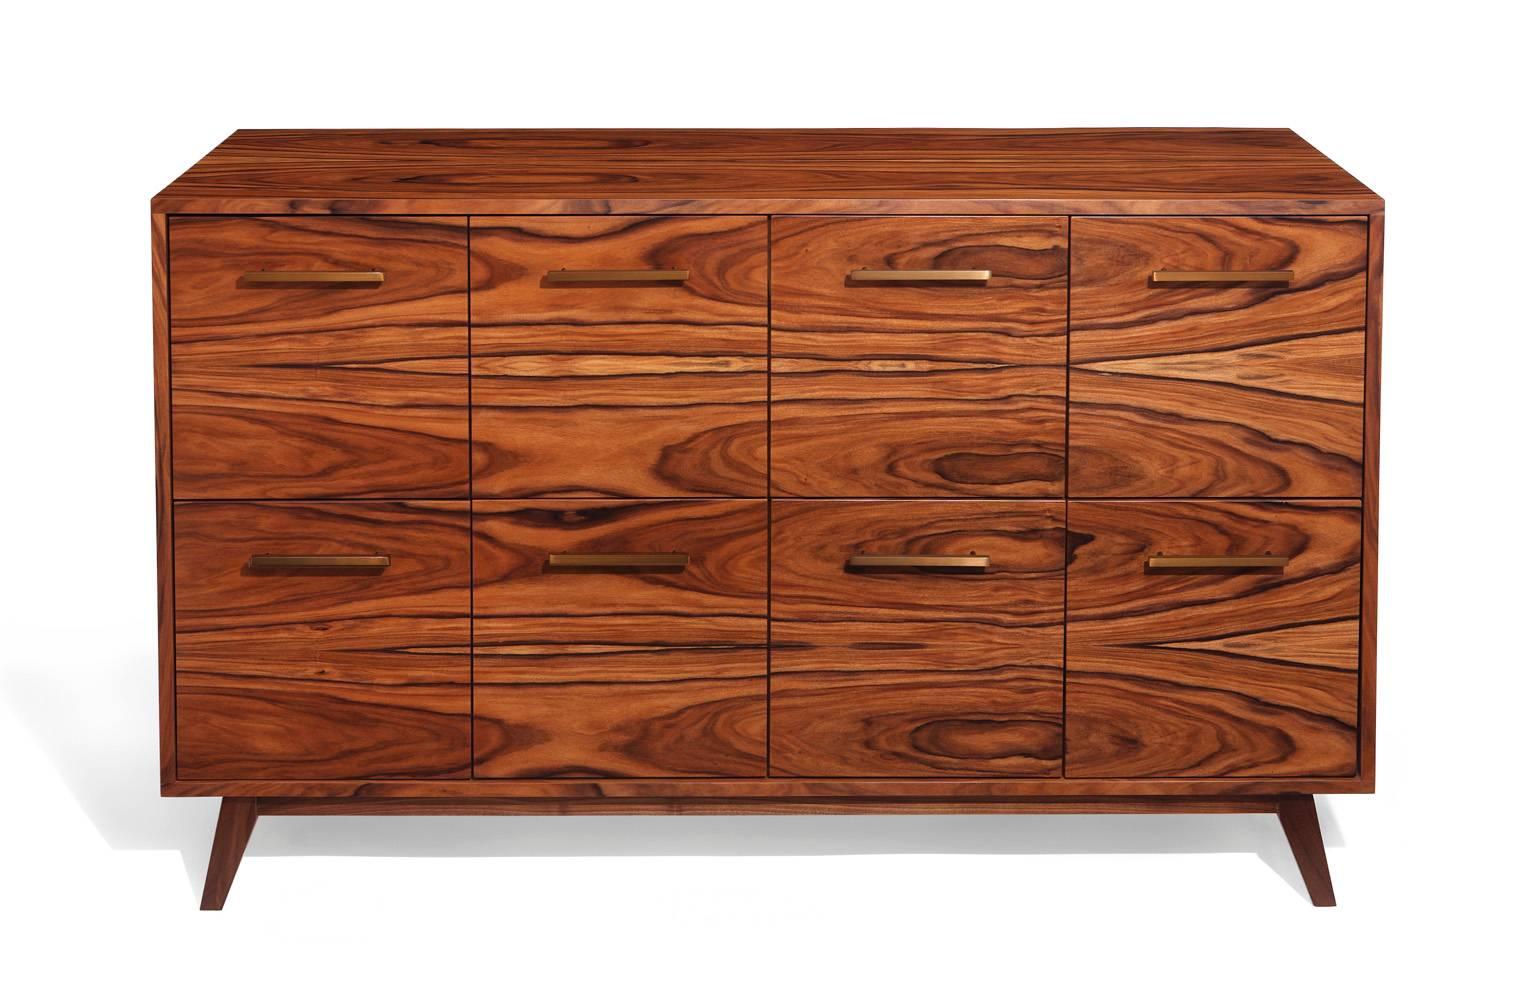 The Atocha Design record cabinet is a handcrafted furniture piece that gives you quick access to your music collection—and elegant storage when it's not in use.

The featured piece uses Santos Palisander hardwood veneer, a sustainable species